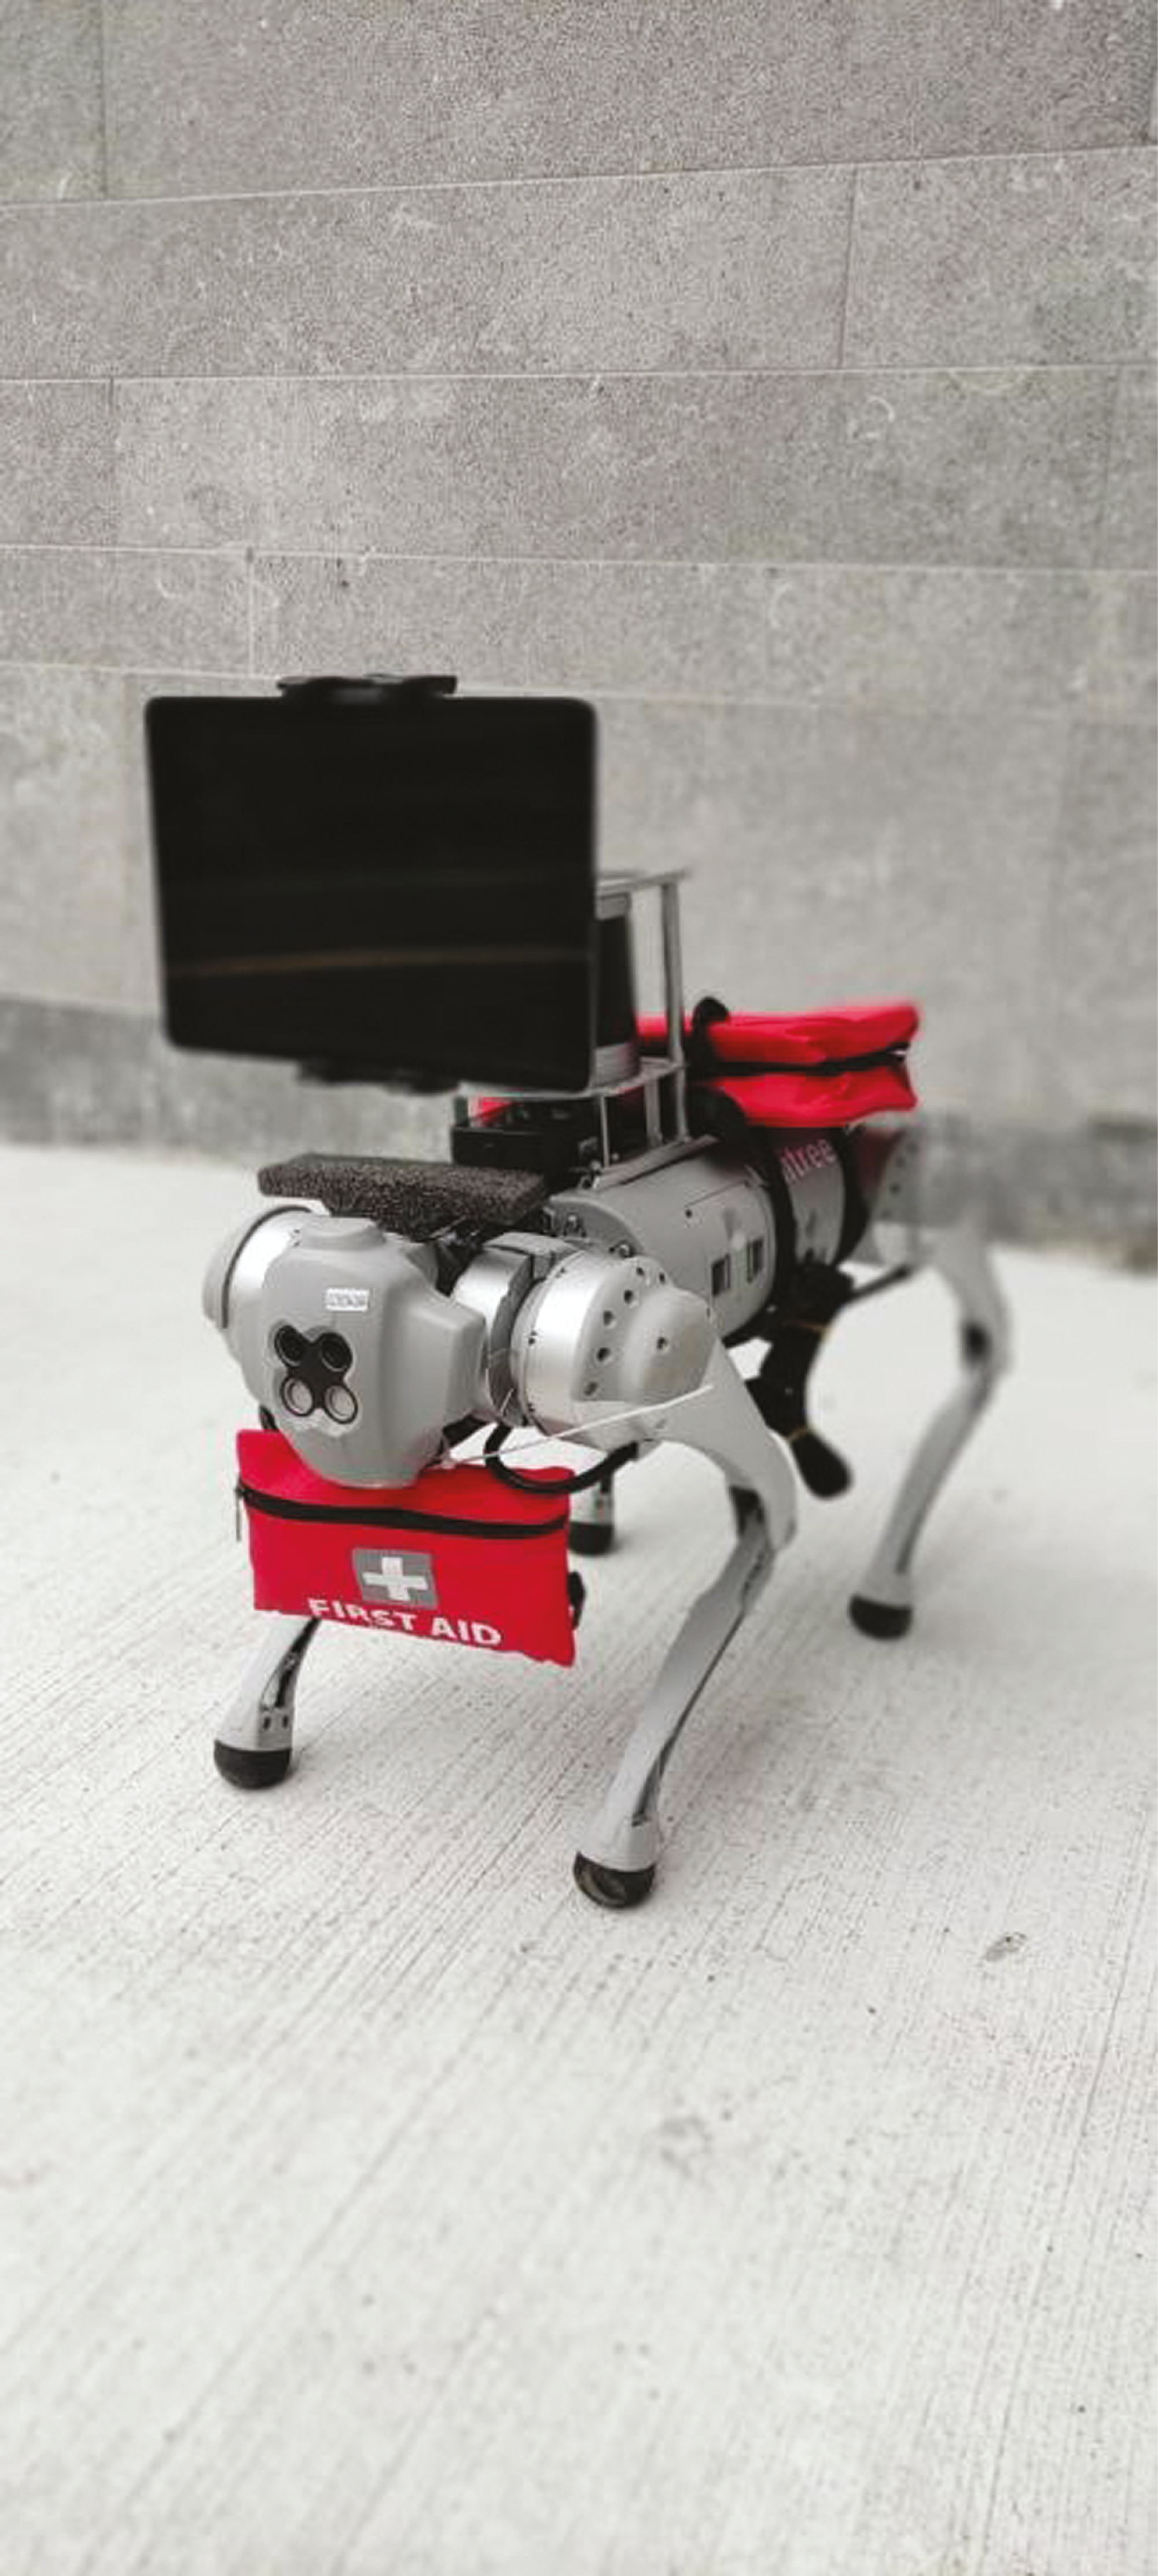 MADRA (Medical Autonomous Droid Remote Assistance) equipped with a medical kit